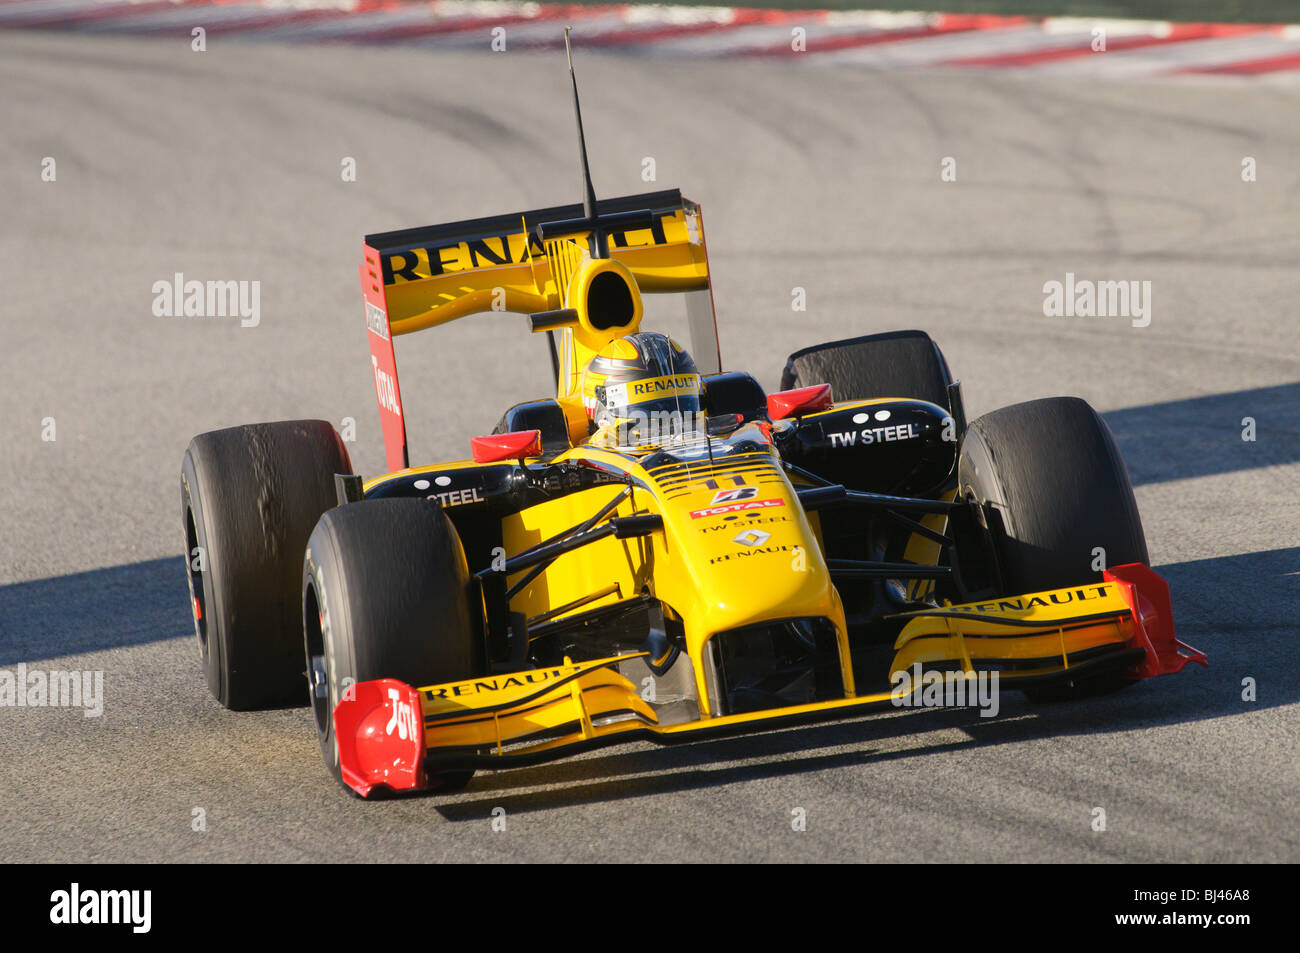 Robert KUBICA (POL) in the Renault R30 race car during Formula 1 Tests in February 2010 Stock Photo